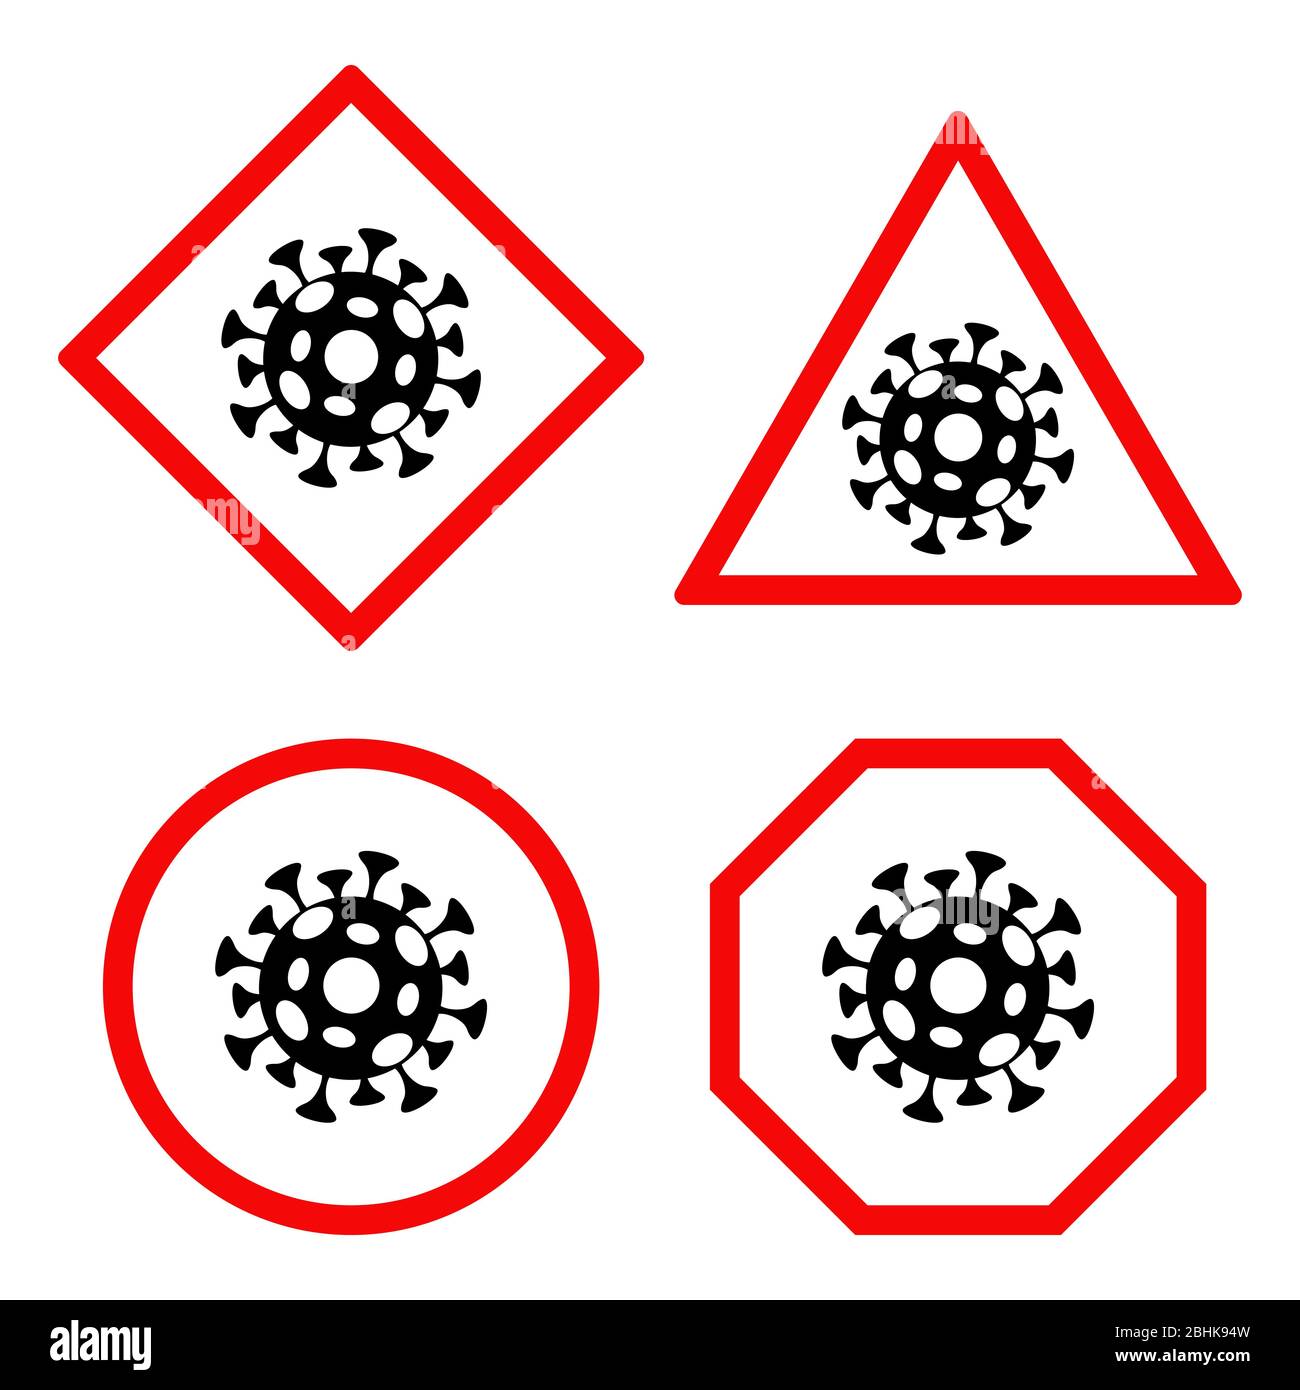 Coronavirus Covid-19 cells in red road icons vector flat illustration. Stop 2019-ncov virus logo concept. Health care, quarantine and self isolation during global pandemic of China influenza. Stock Vector